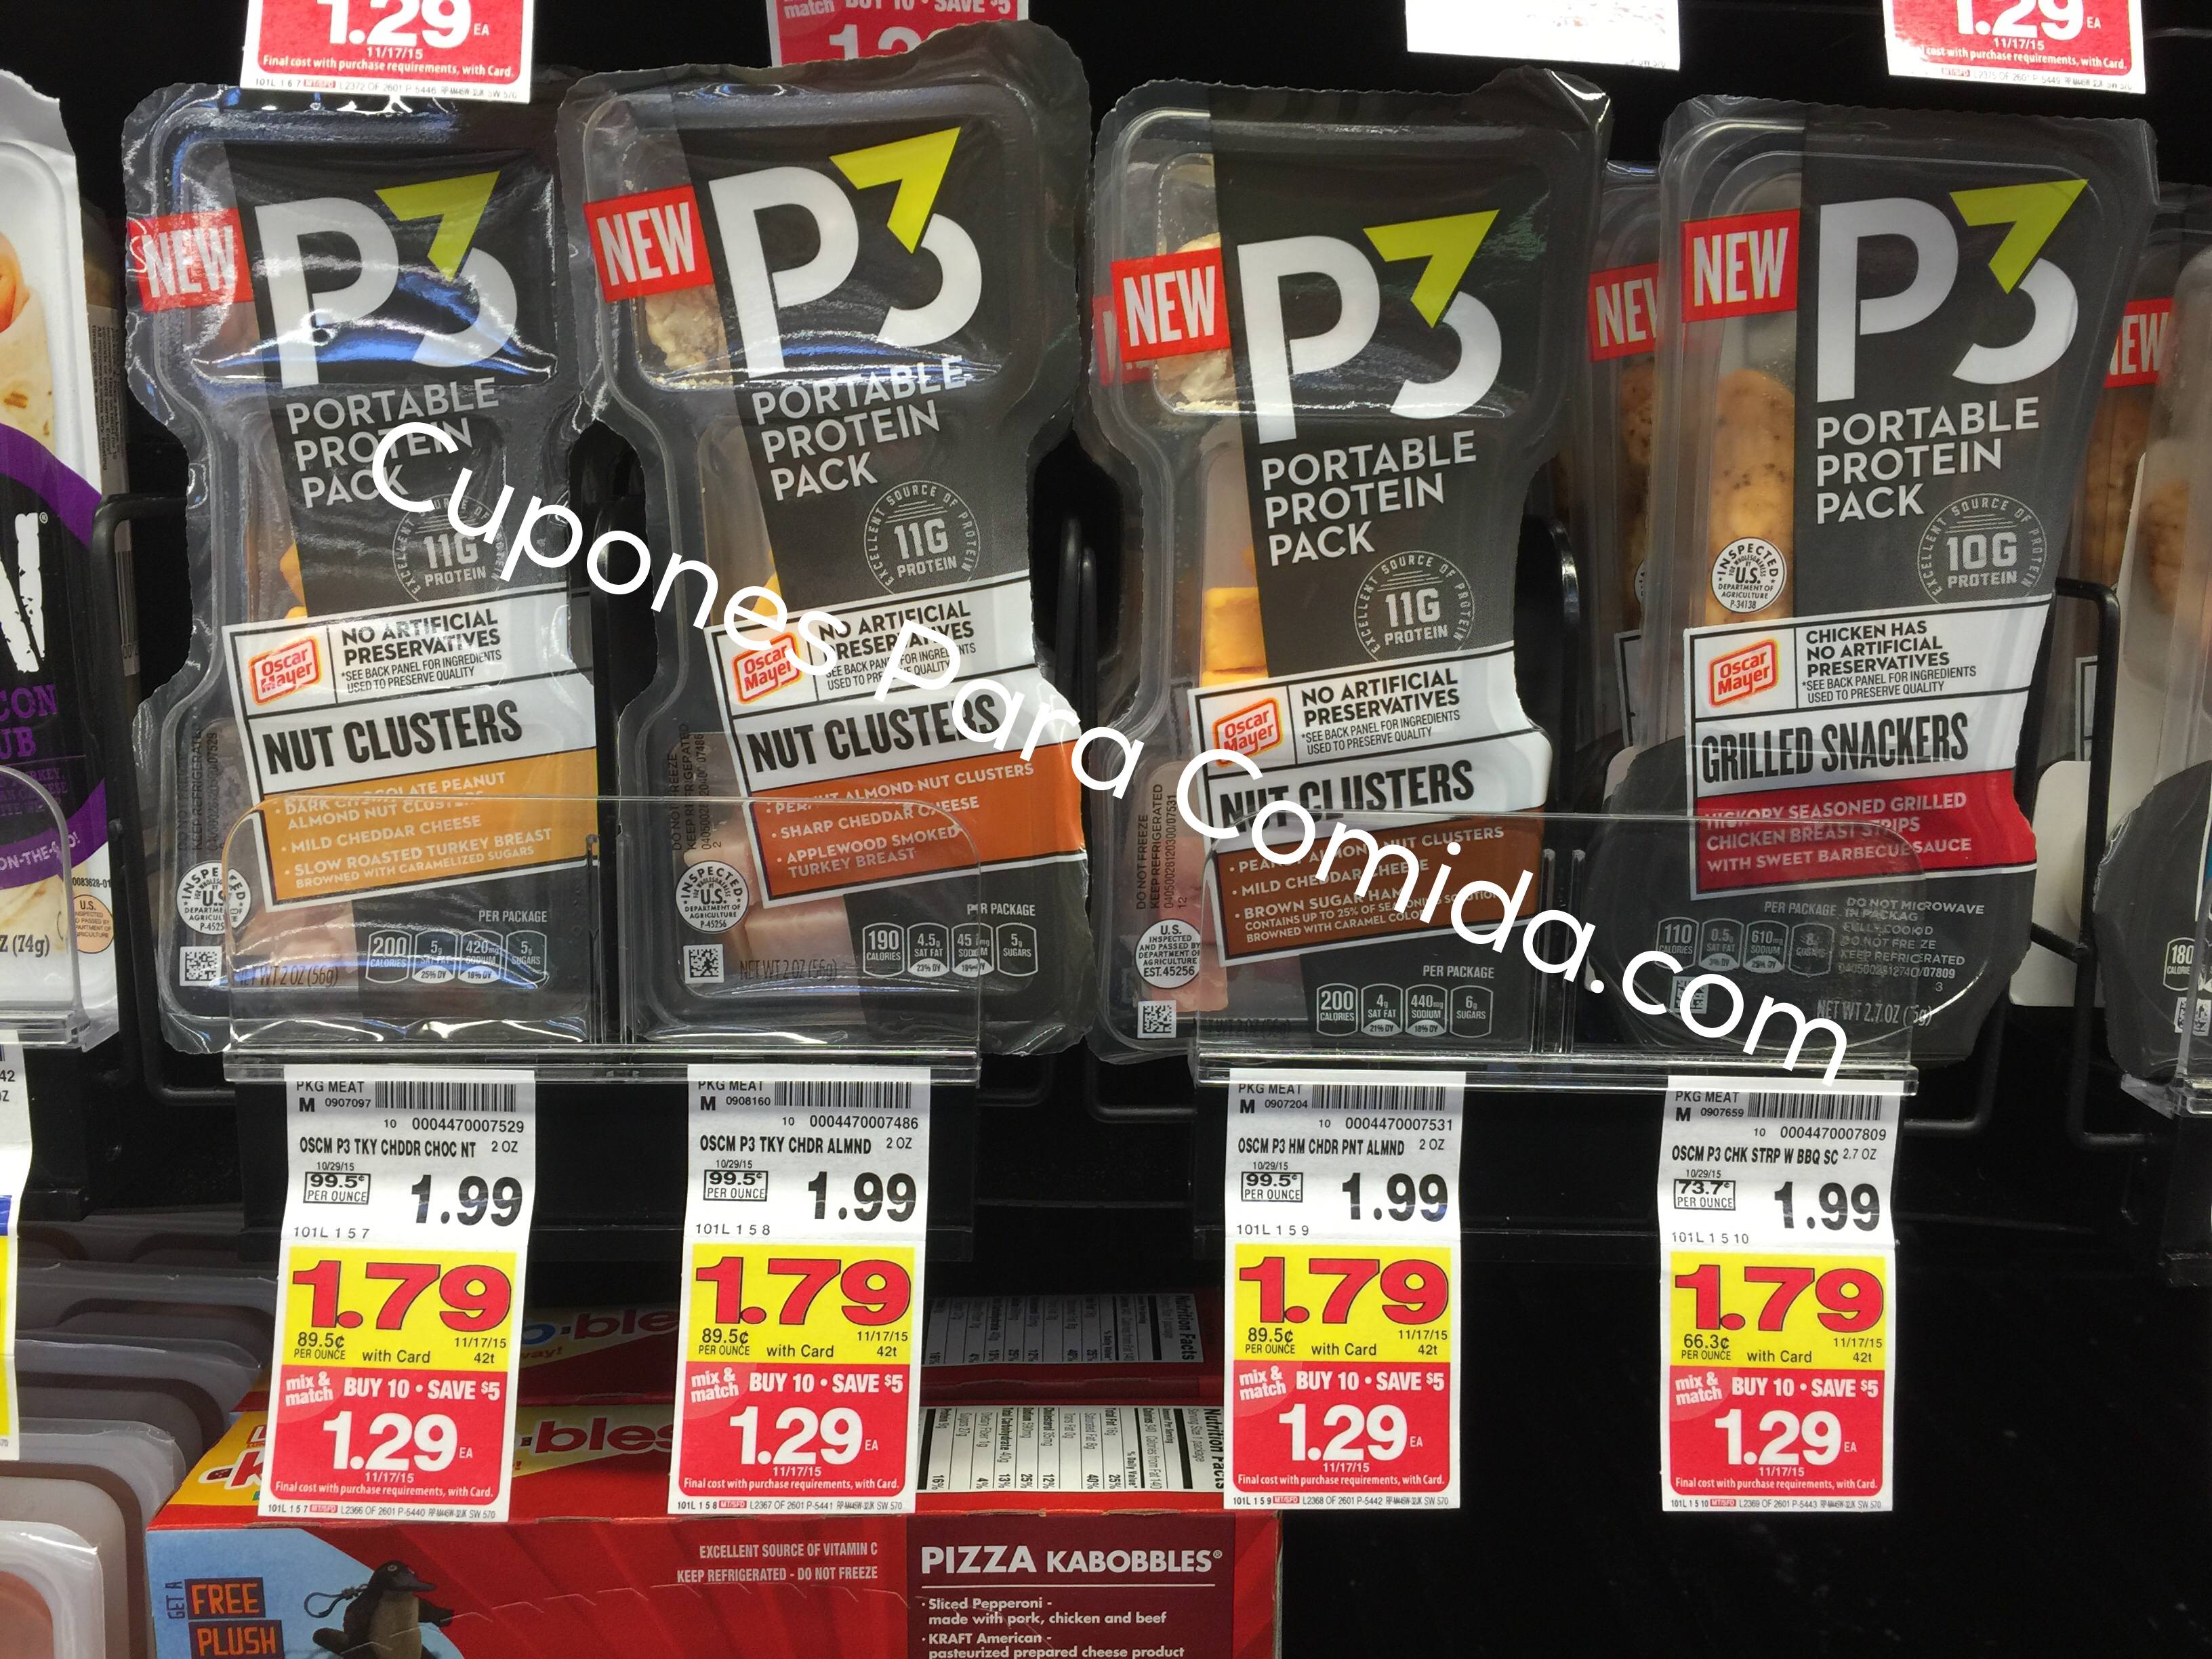 P3 Portable Protein pack 11/04/15